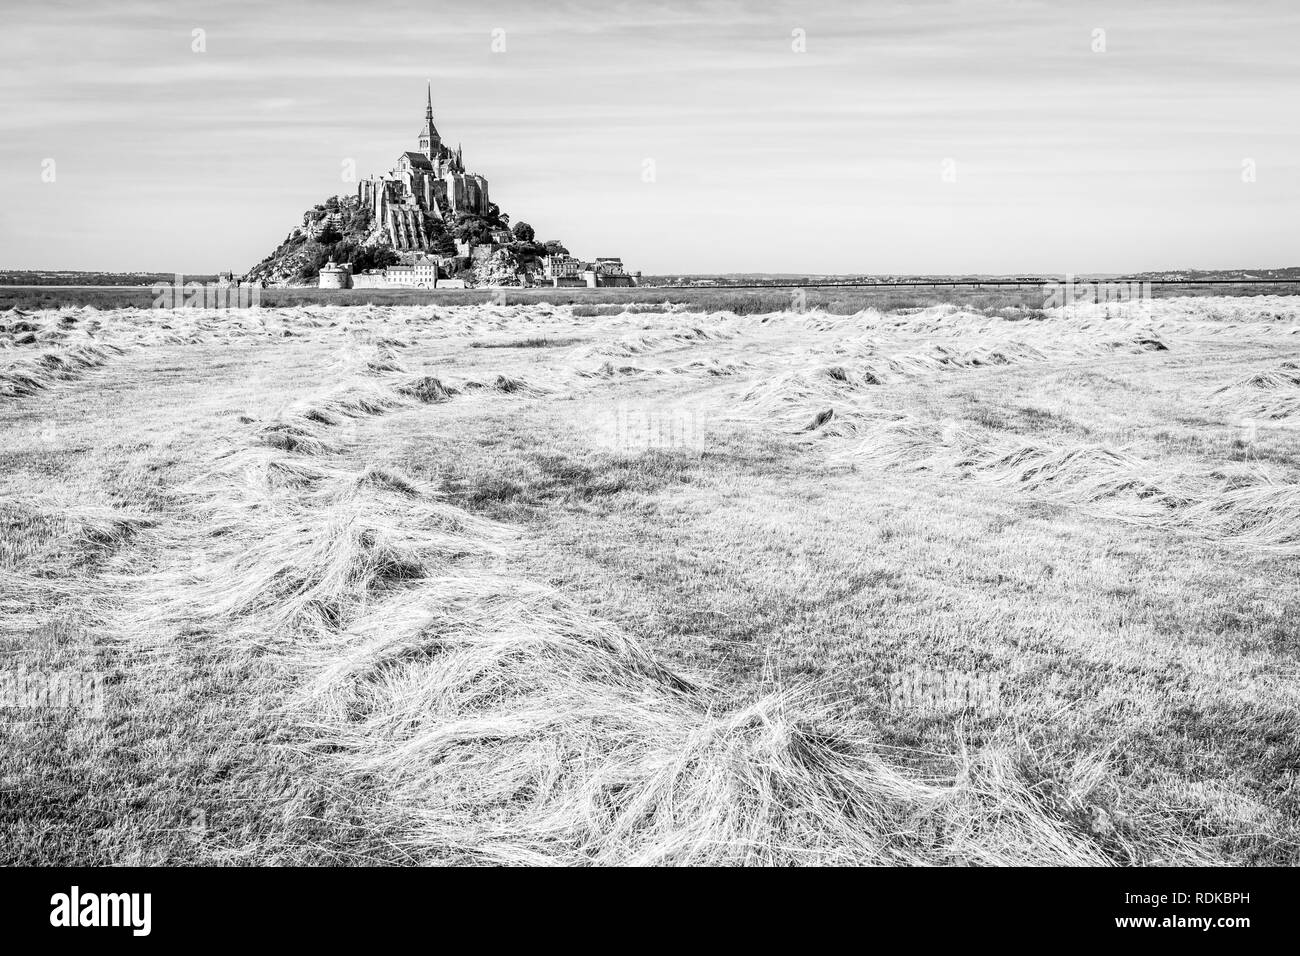 The Mont Saint-Michel tidal island in Normandy, France, with hay windrows drying in a field in the foreground under a blue sky with fibrous clouds. Stock Photo